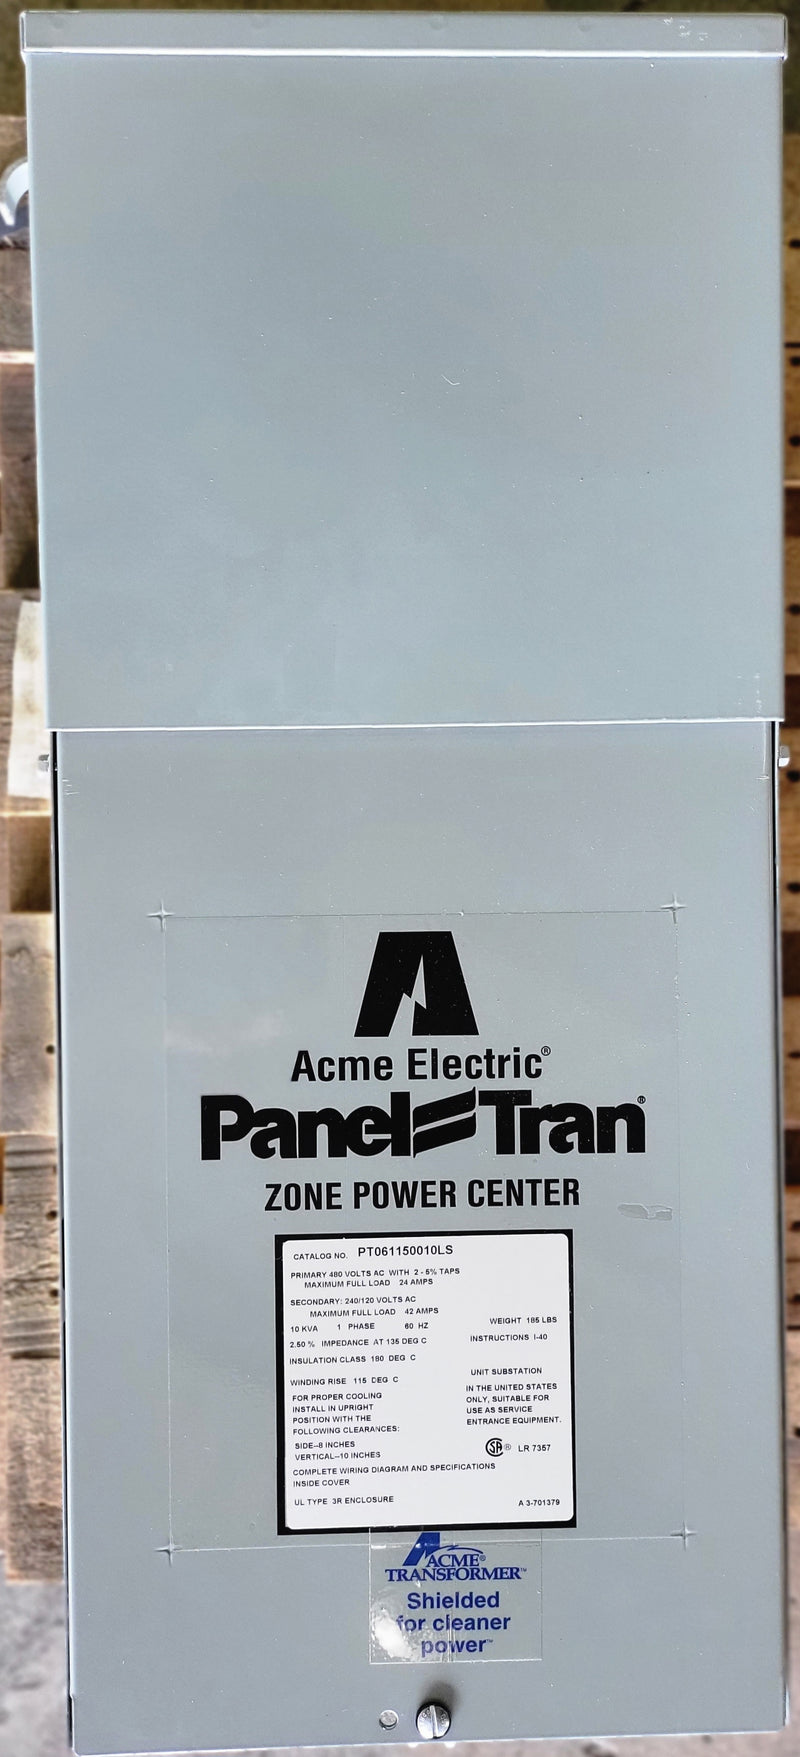 ACME Hubbell DRY 136P21054 Reliance Electric  10 KVA  480/208/120, 1 Ph, PT061150010LS New Open box